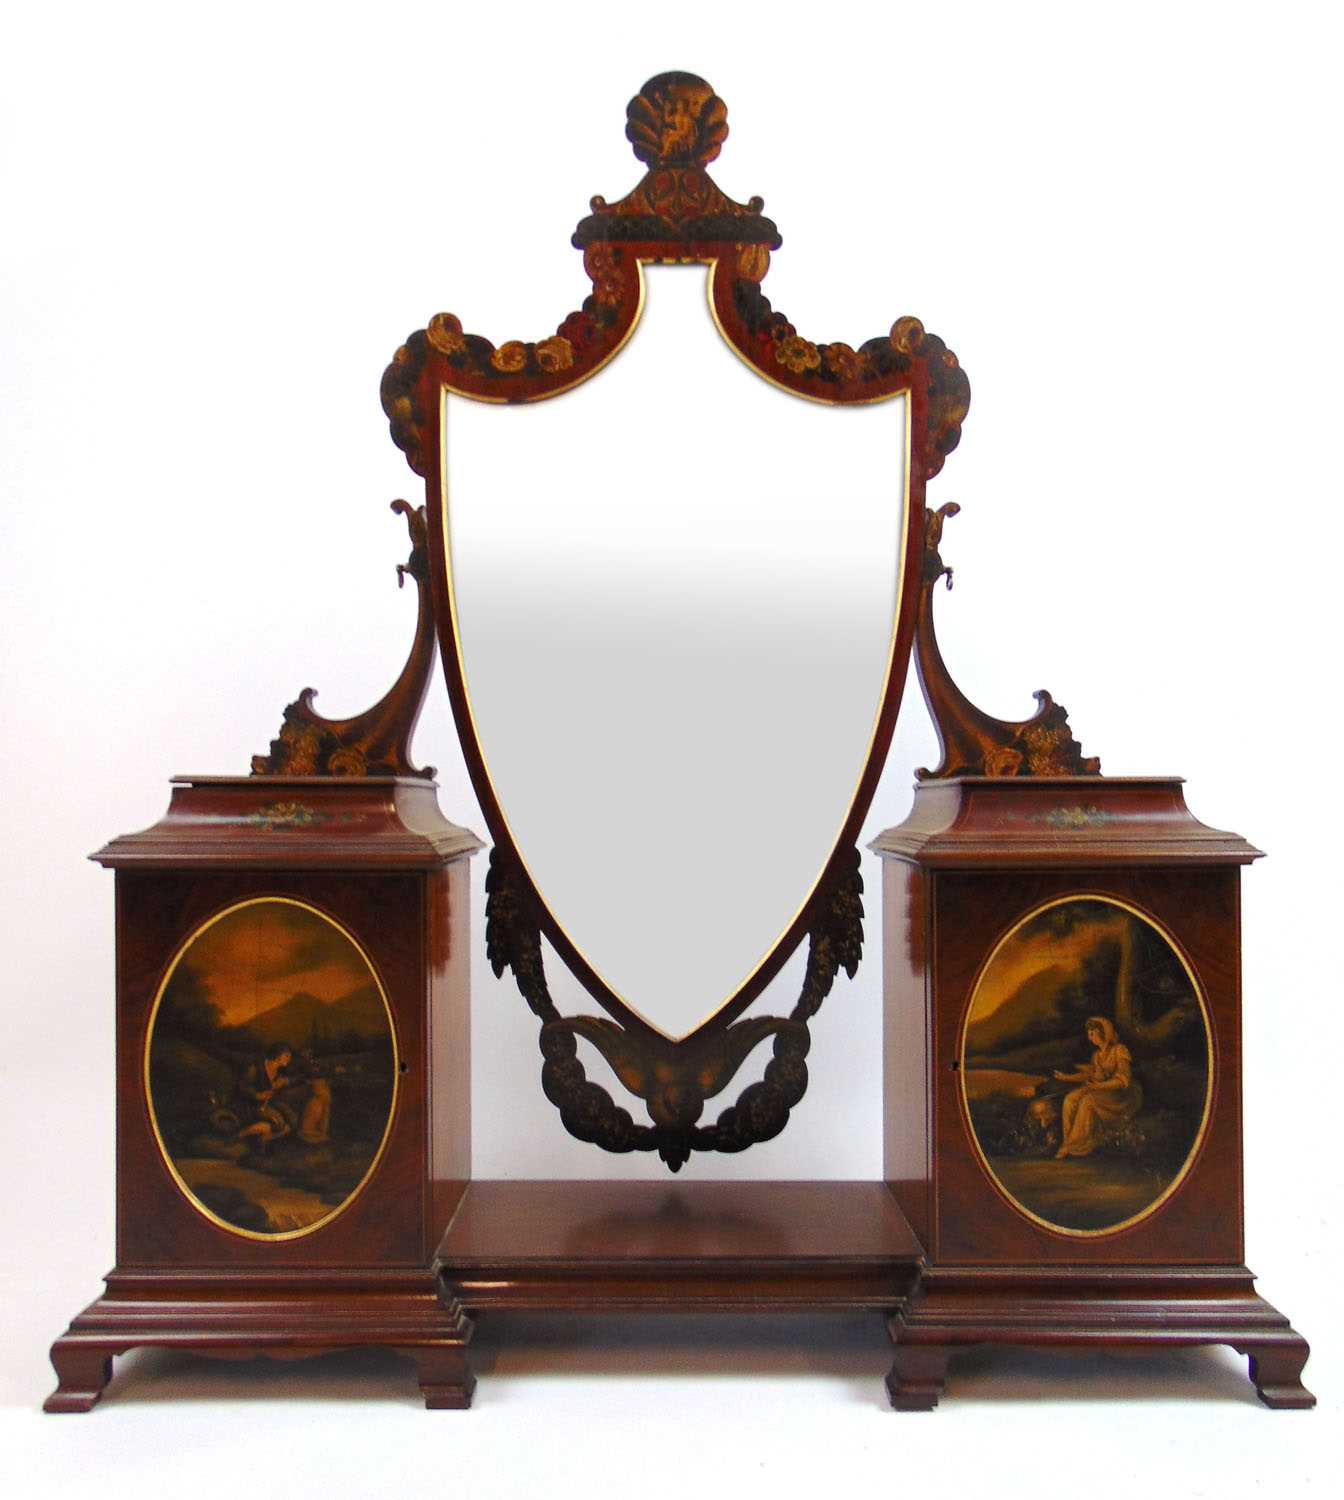 An Edwardian mahogany and painted toilet mirror, the shield plate surrounded by floral and swag